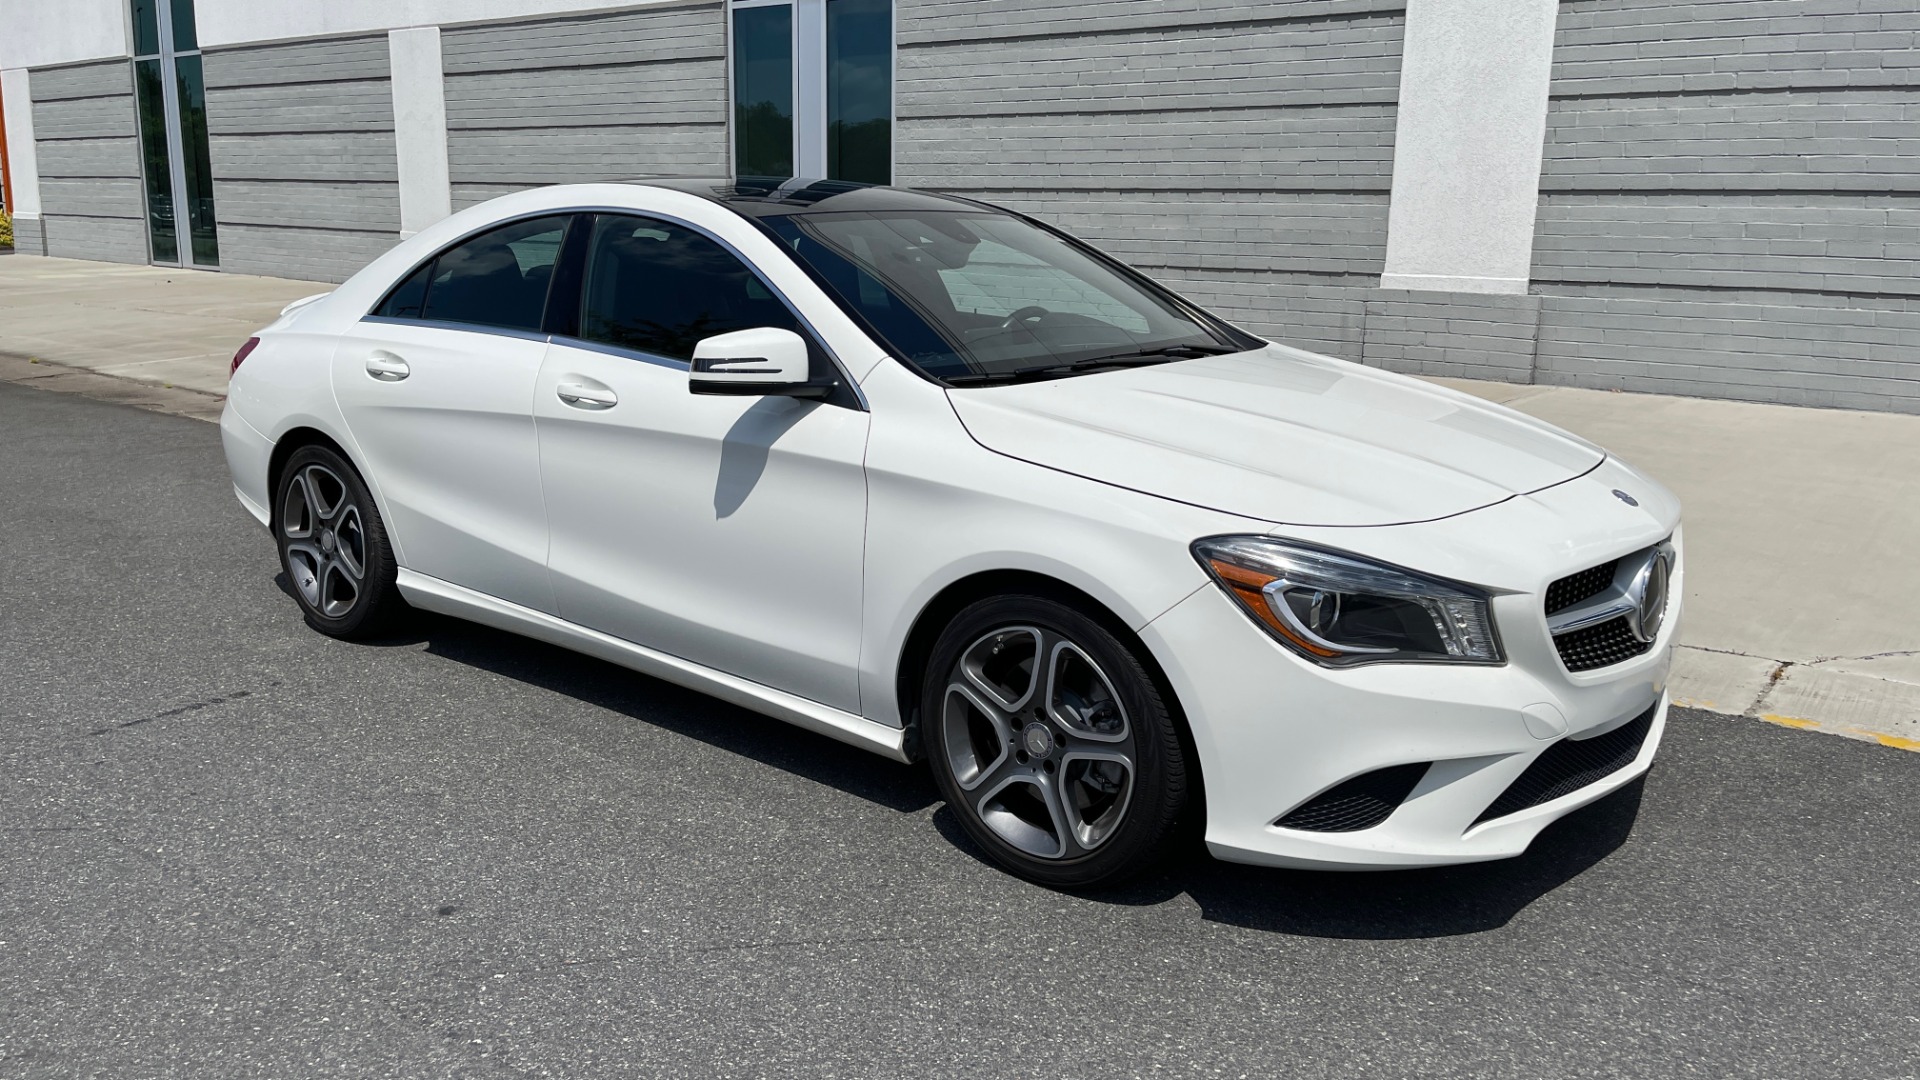 Used 2014 Mercedes-Benz CLA-Class 250 PREMIUM / NAV / MULTIMEDIA PKG / PANO-ROOF / REARVIEW for sale Sold at Formula Imports in Charlotte NC 28227 6